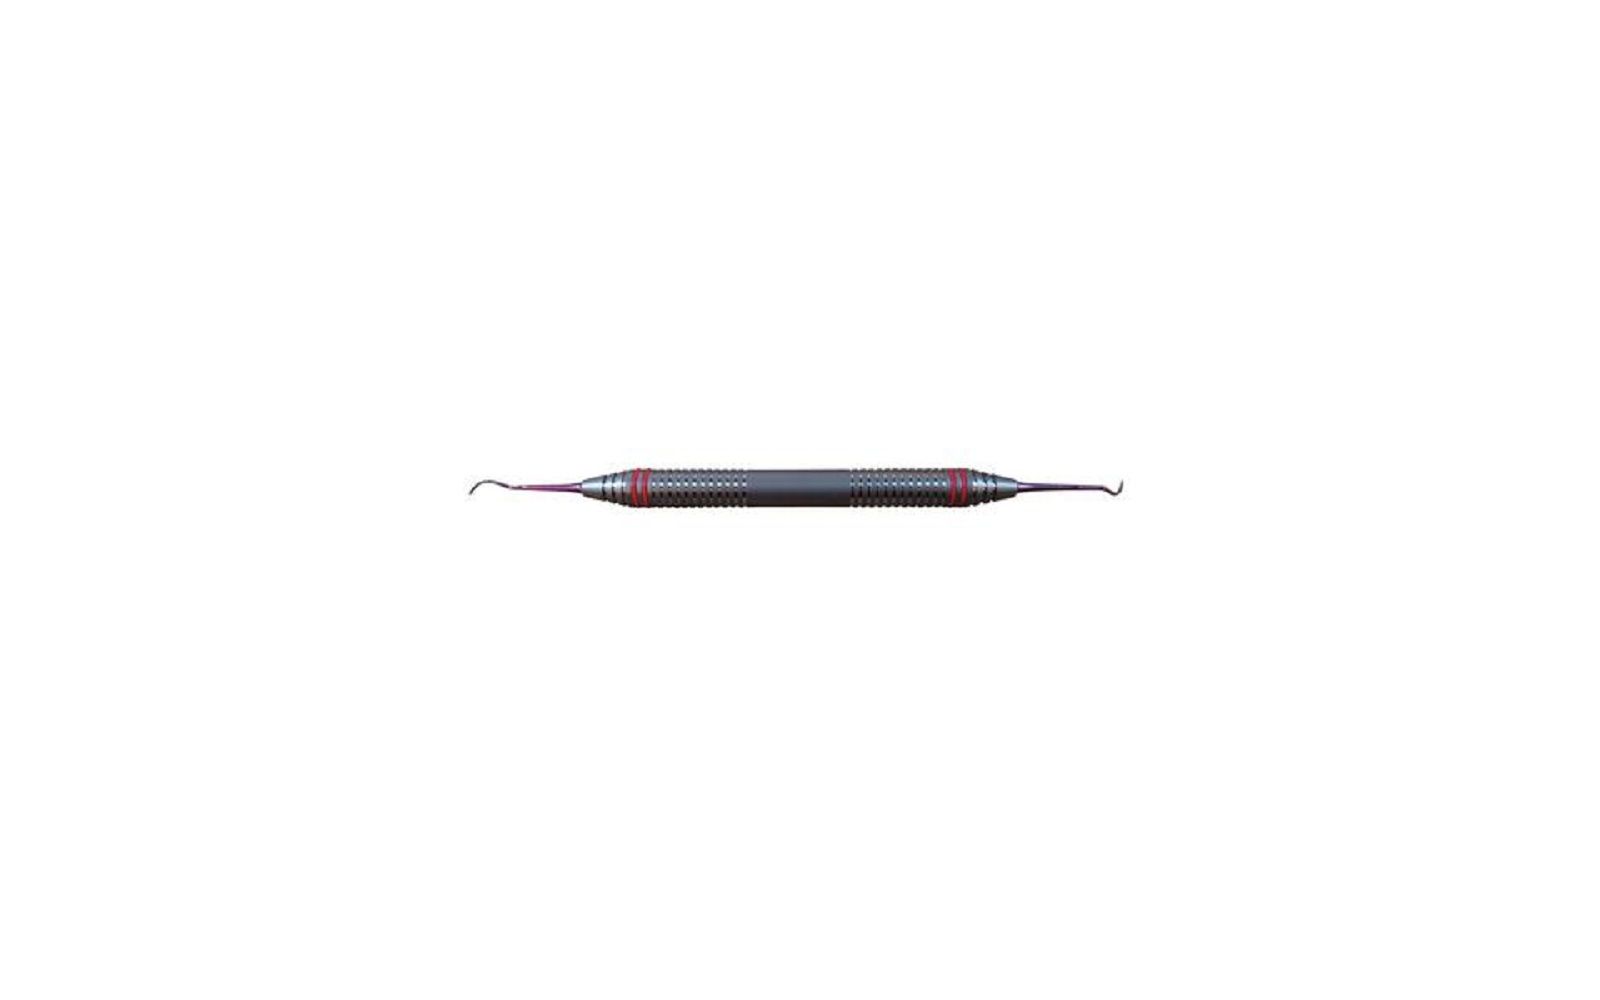 Implamate® implant scalers – 204s posterior, double end